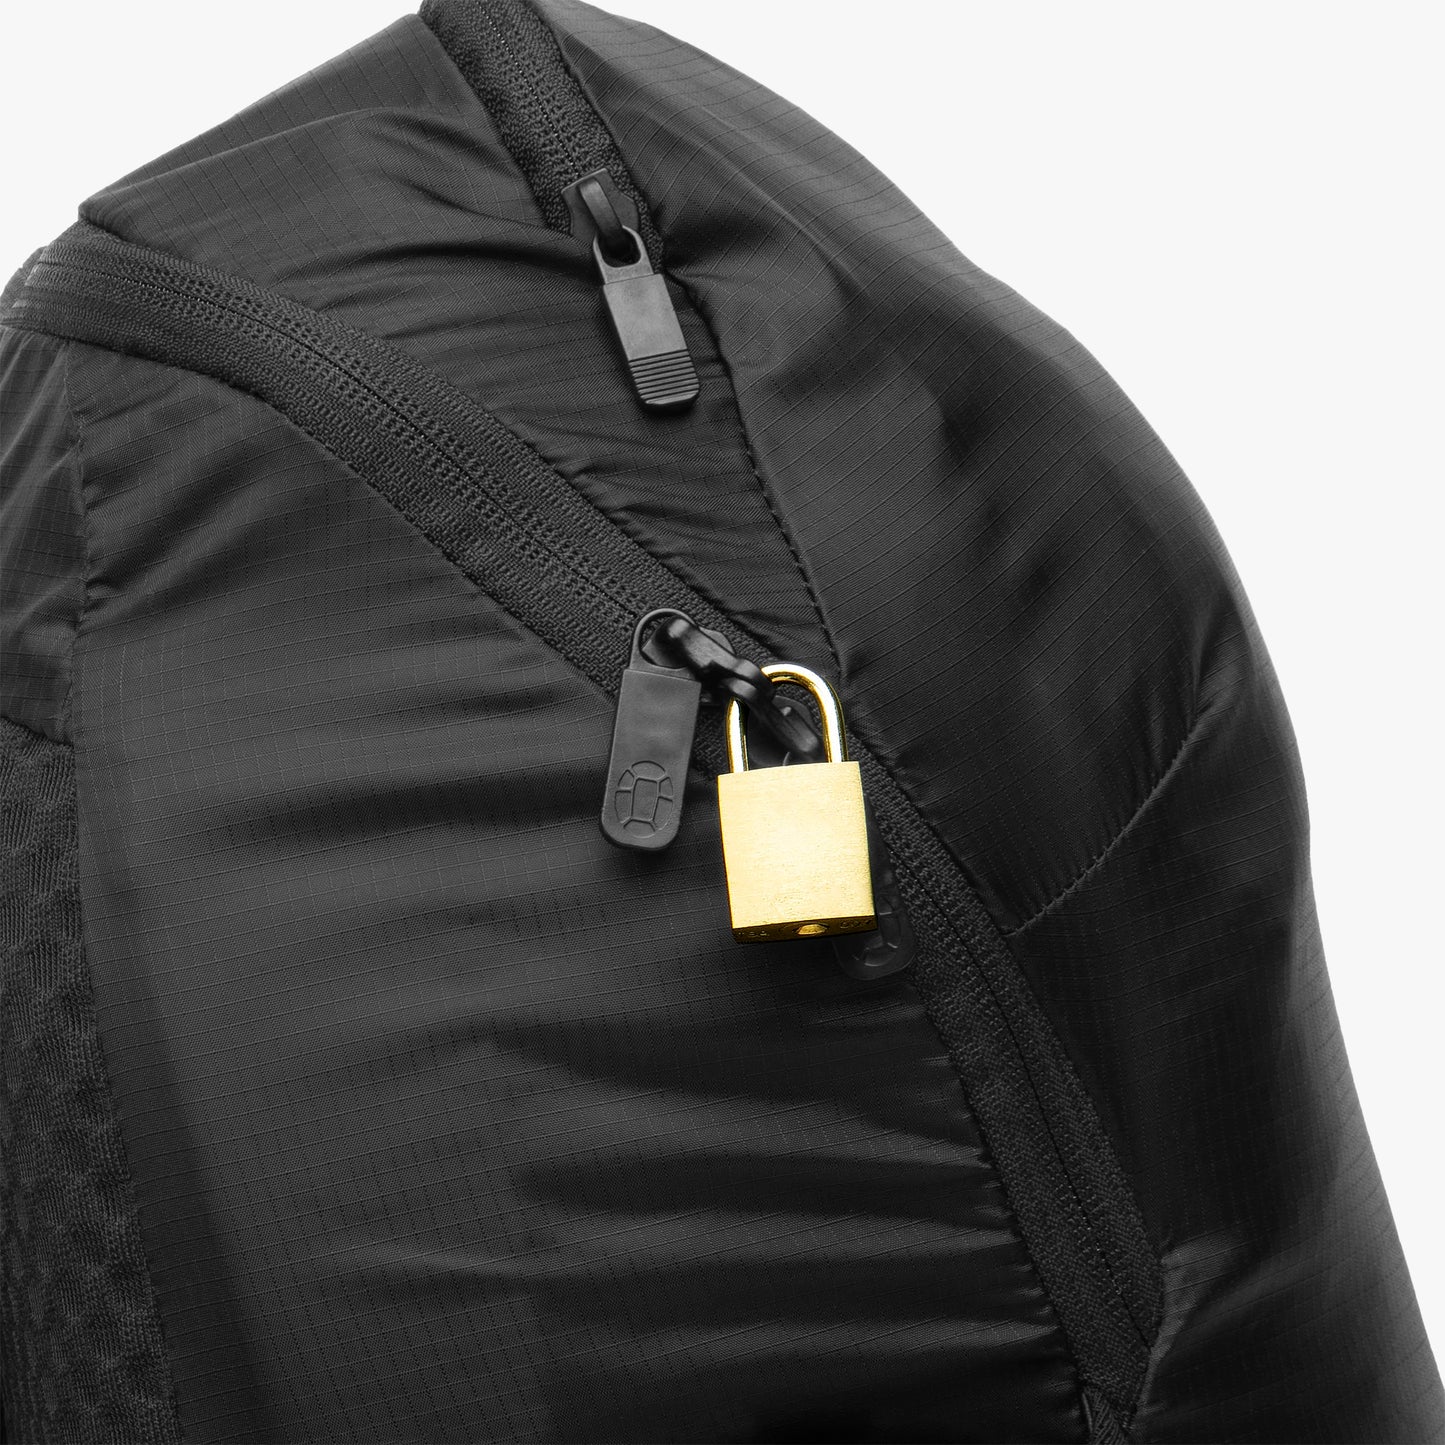 Lockable zippers to keep your stuff safe (lock not included)